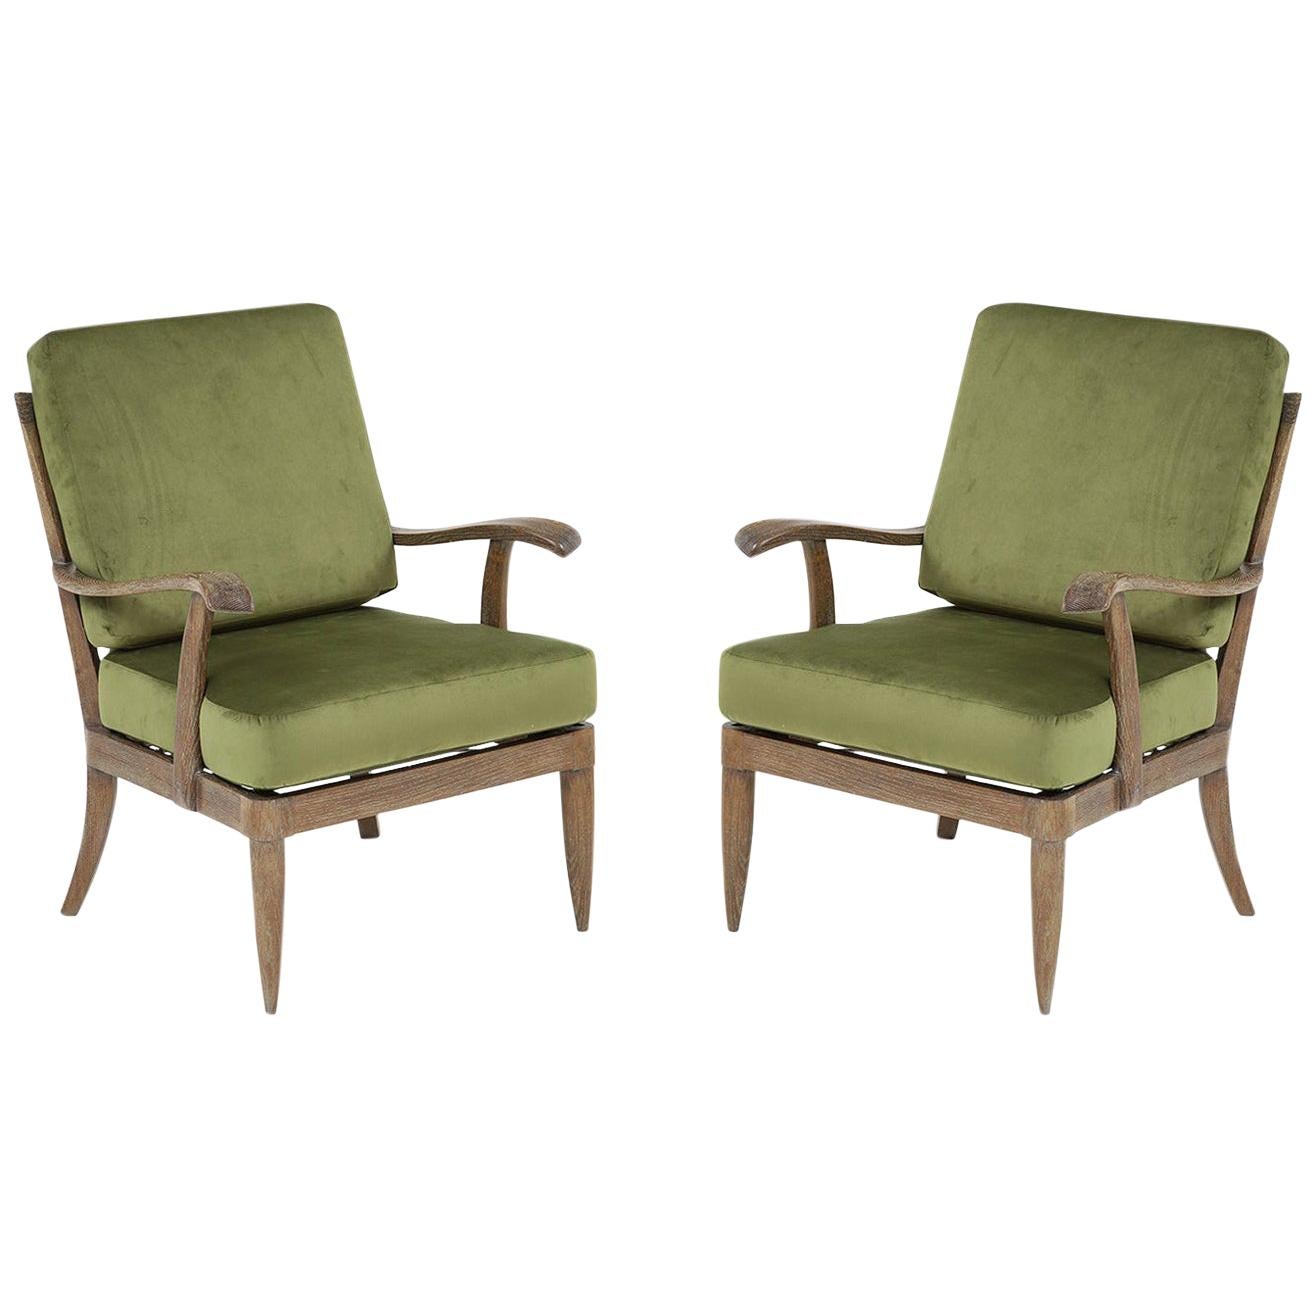 Pair of French Midcentury Cerused Oak Armchairs/ Lounge Chairs